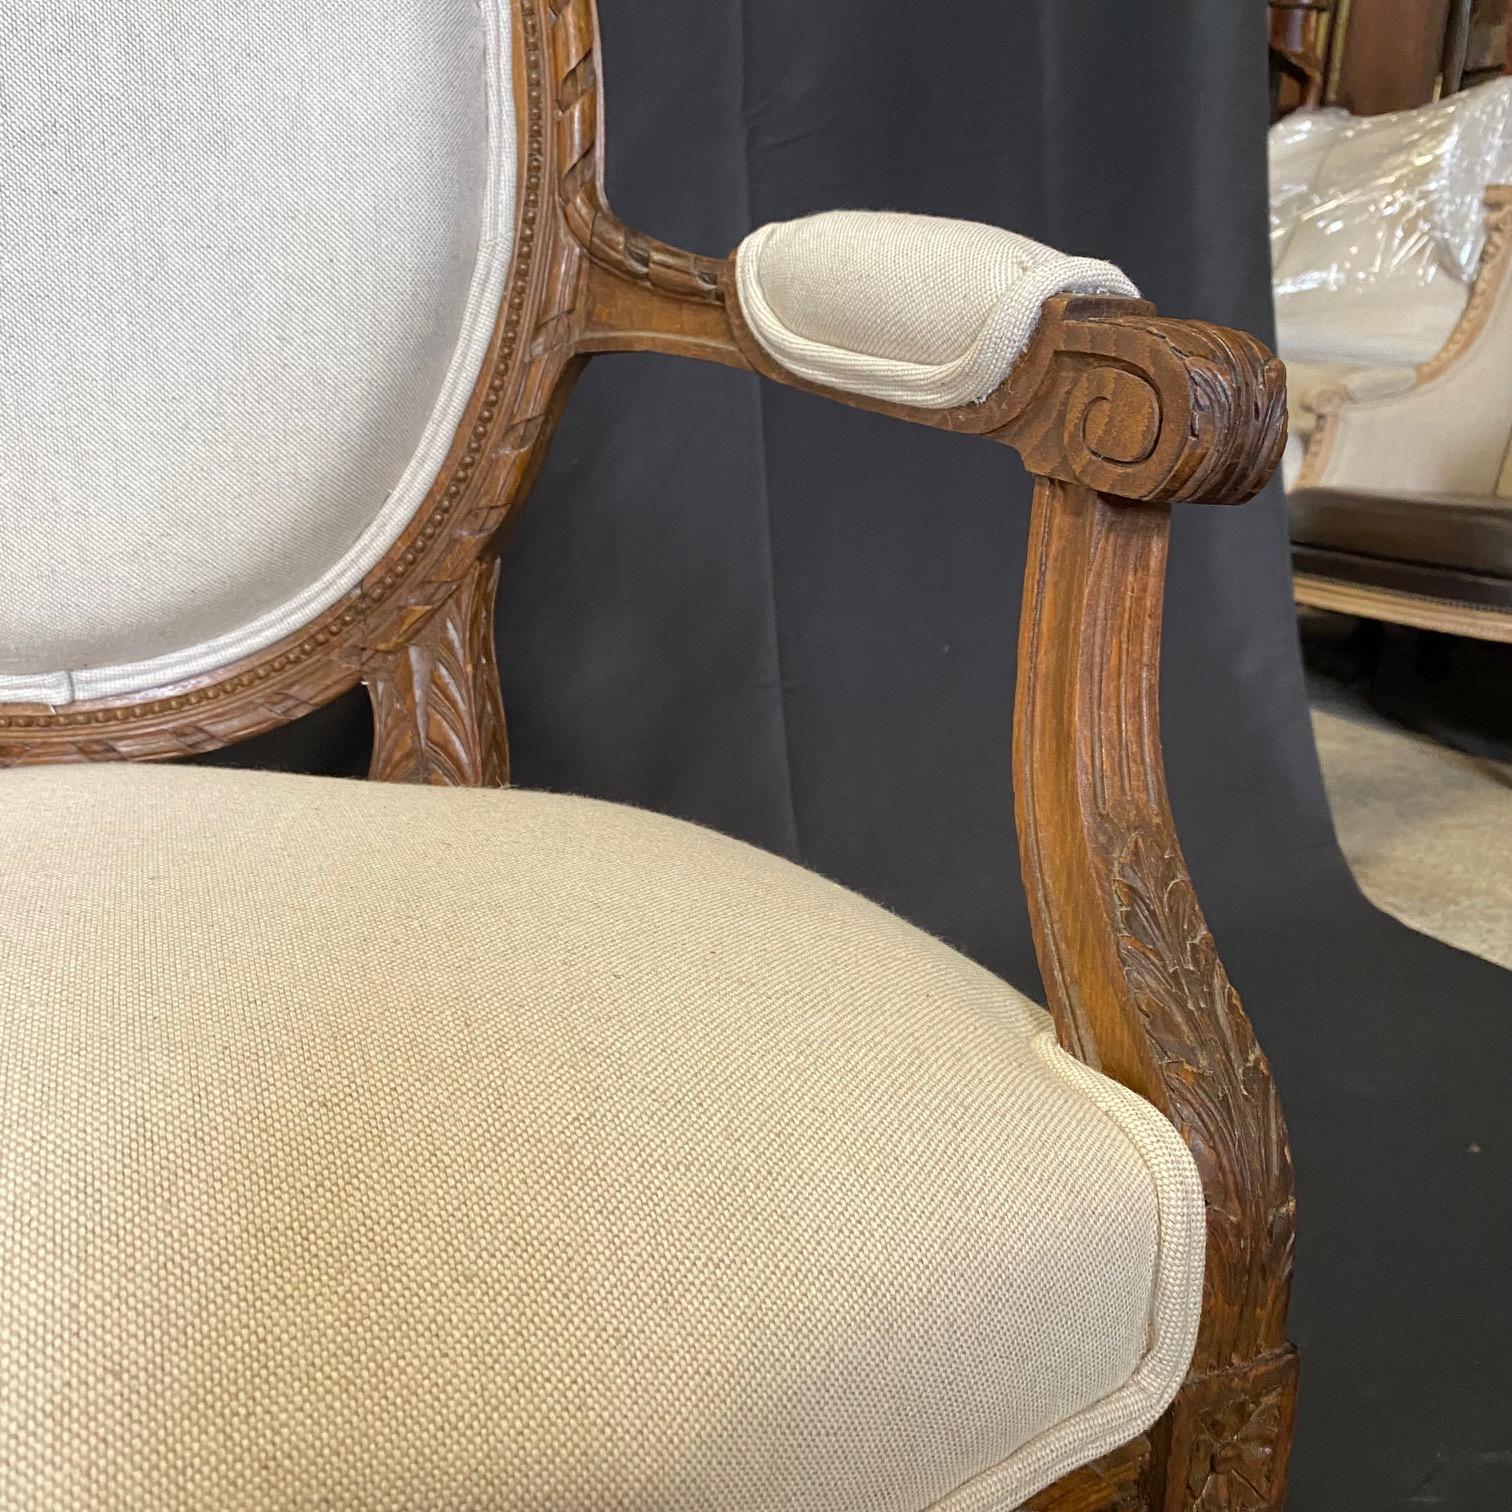 Pair of antique 19th century French Louis XVI armchairs with new neutral high end British upholstery.  Carved beautifully in walnut with a fantastic patina. Each chair is raised by fine and uniquely shaped circular fluted legs below carved block